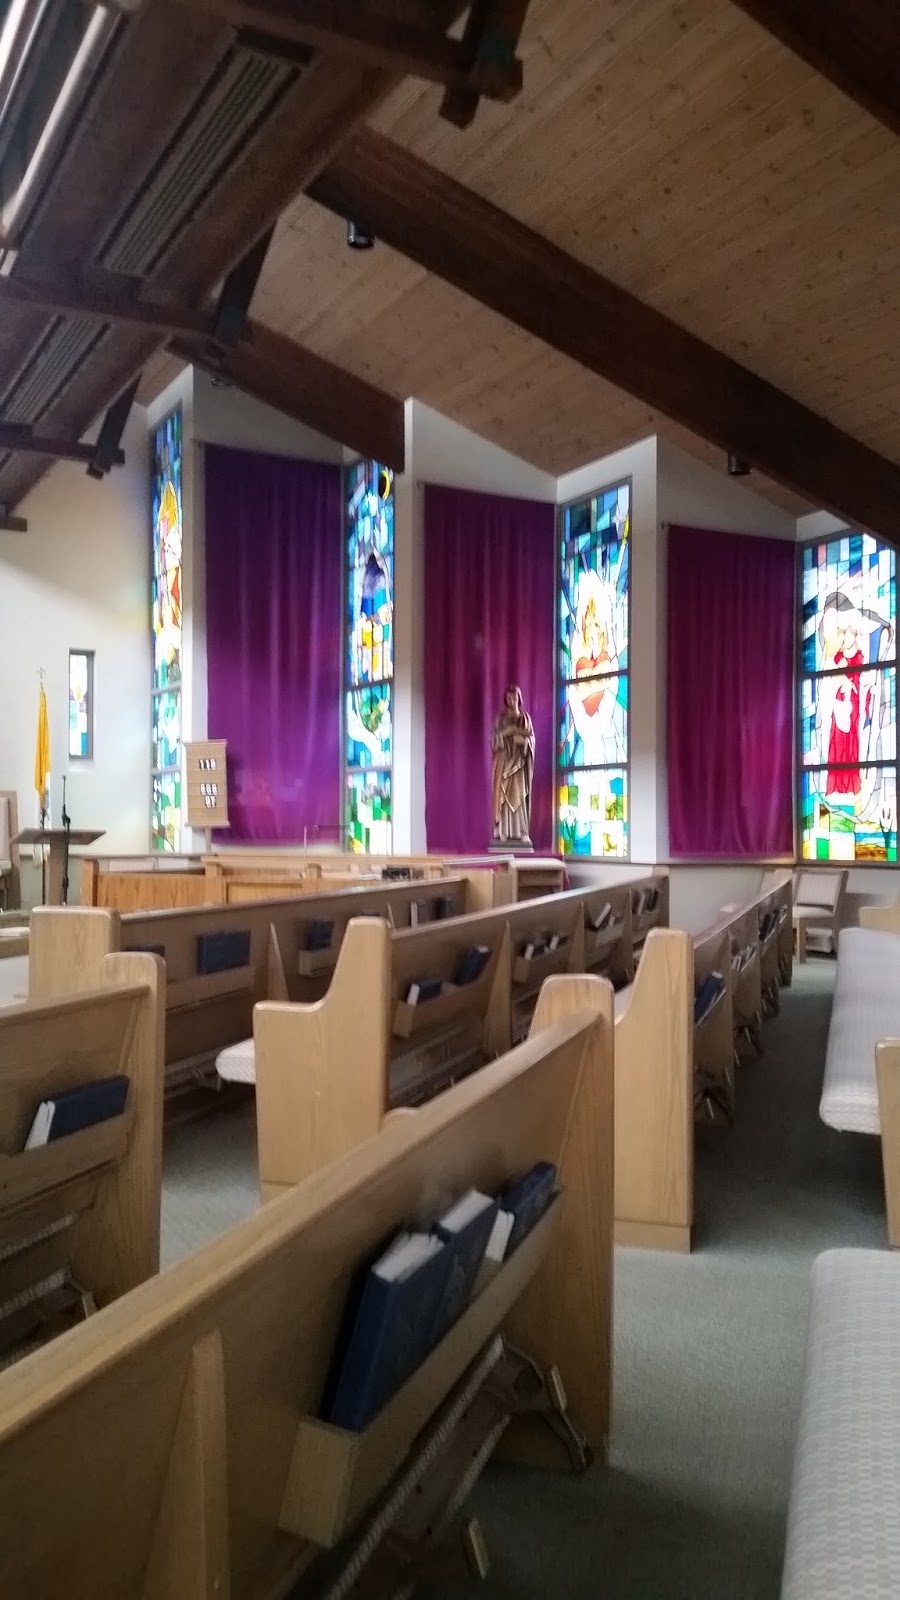 Our Lady of Victory Roman Catholic Church | 327 Cherry Lane Rd, Tannersville, PA 18372 | Phone: (570) 629-4572